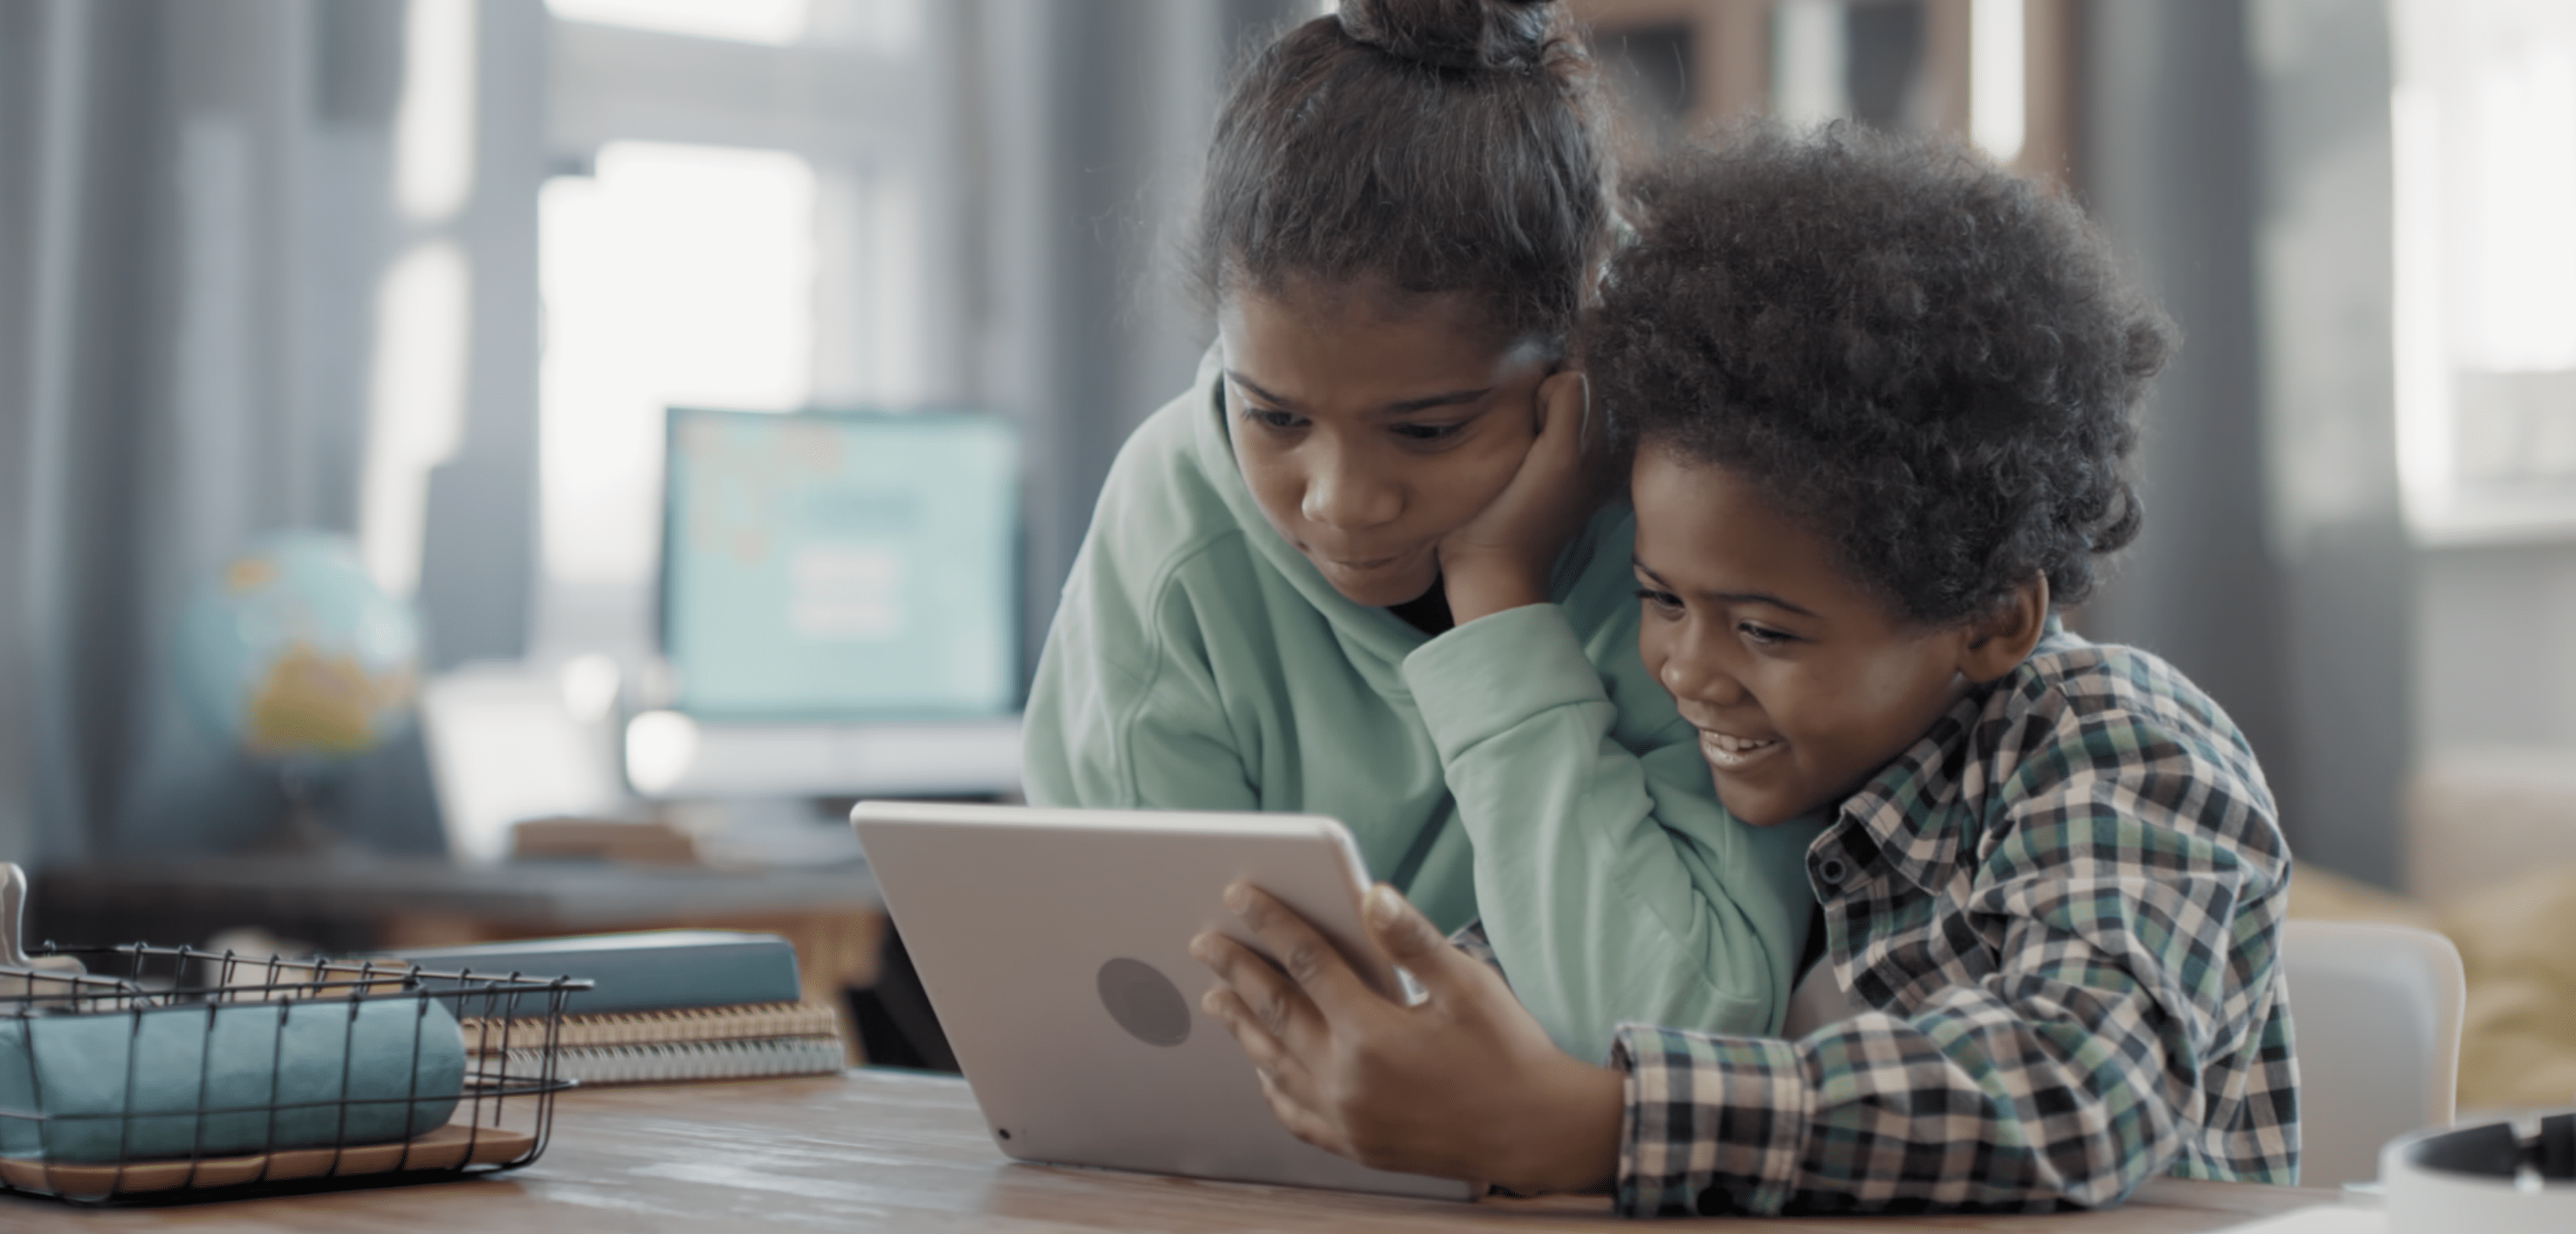 Image of a young boy and a young girl looking at a smart tablet